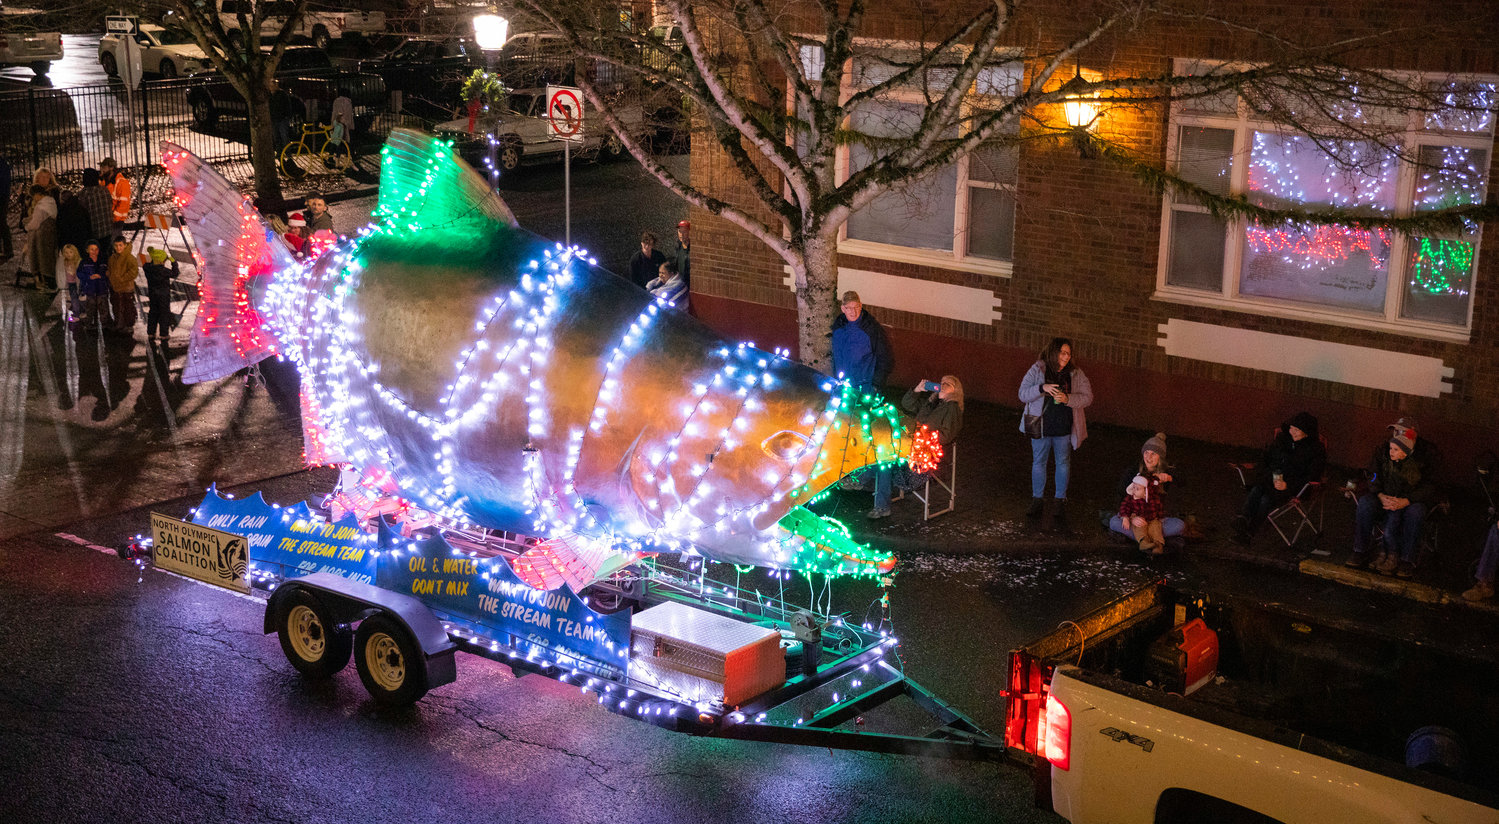 A salmon illuminates downtown Centralia during the Lighted Tractor Parade Saturday night in downtown Centralia.